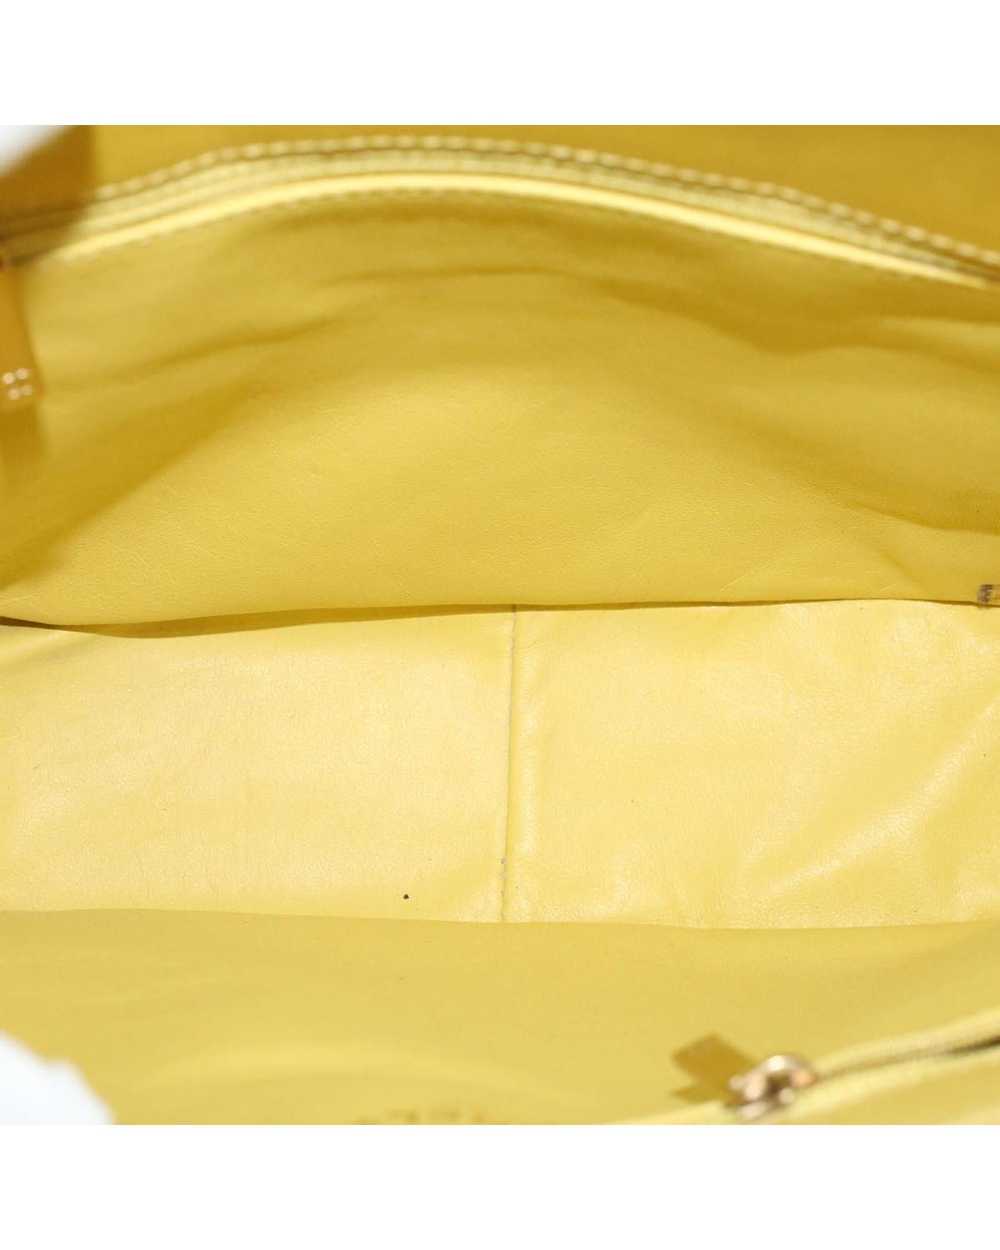 Chanel Yellow Patent Leather Hand Bag - image 10